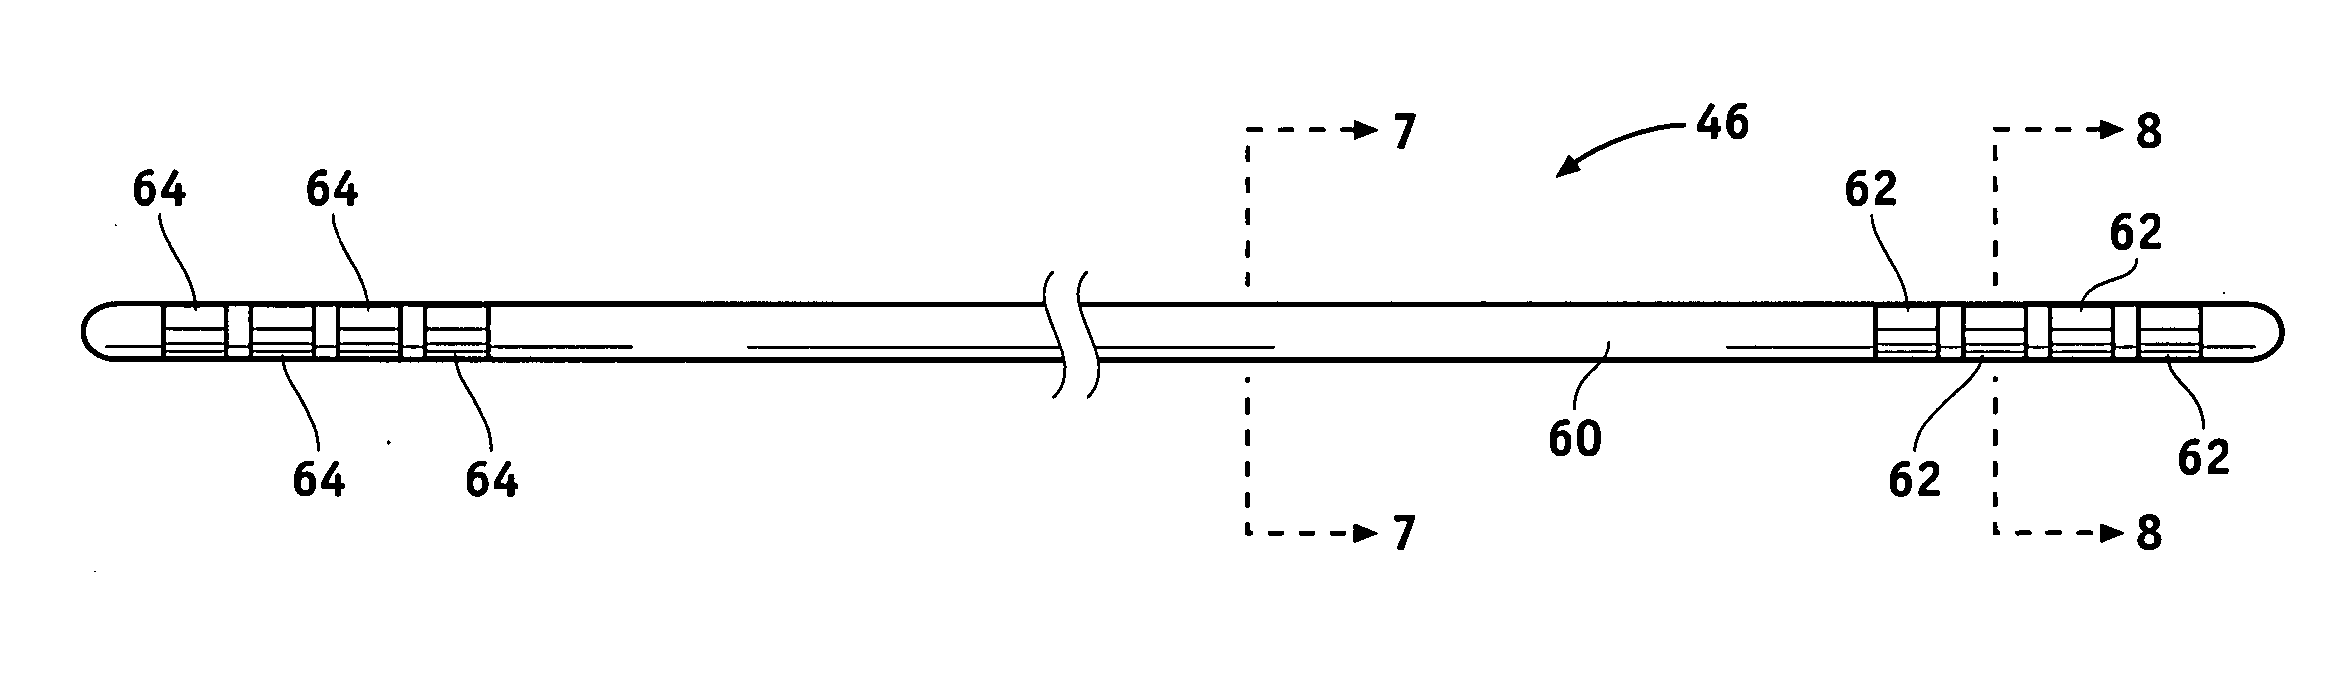 Lead electrode for use in an MRI-safe implantable medical device